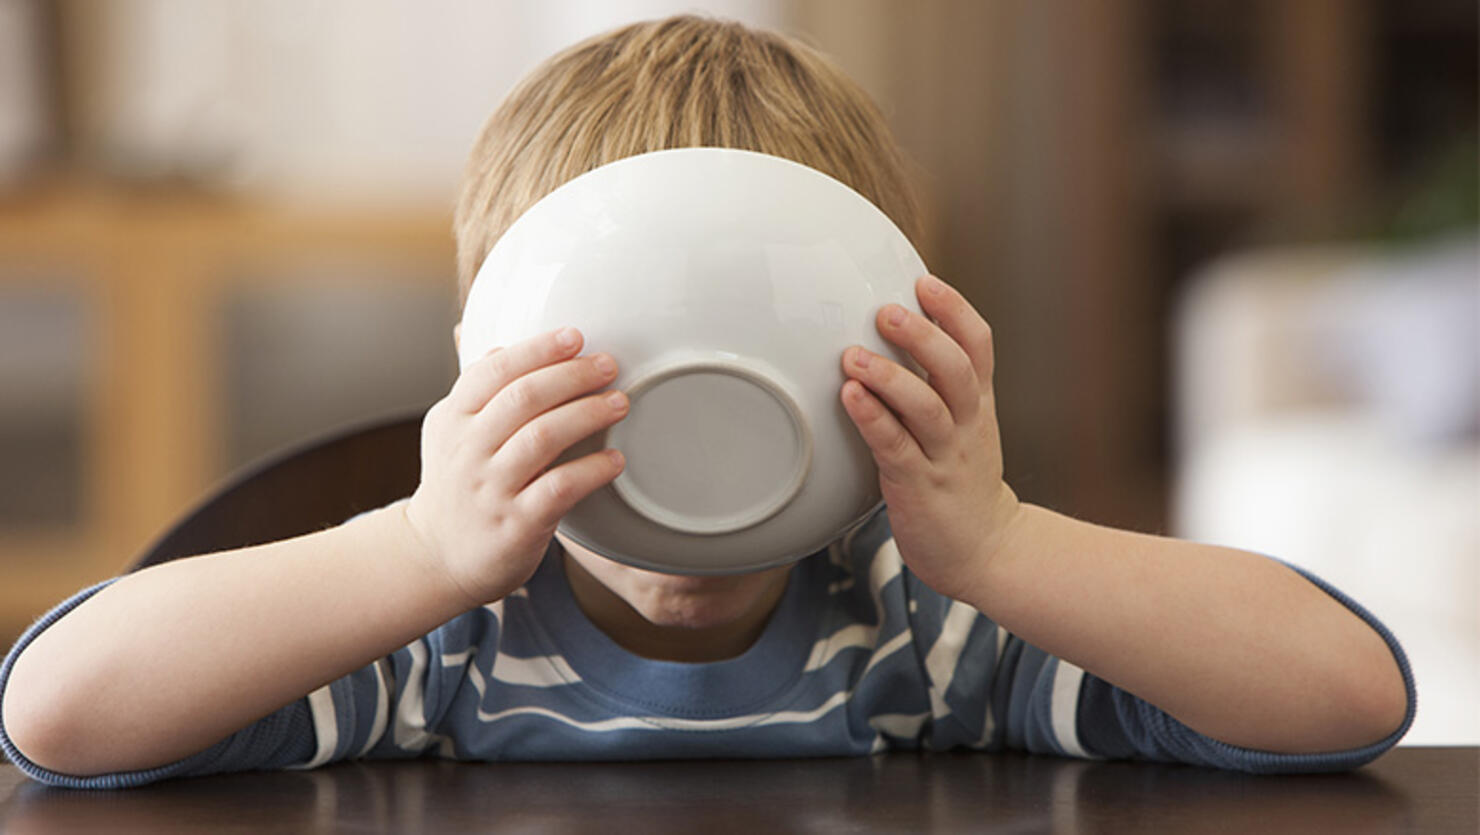 Young boy eating from bowl